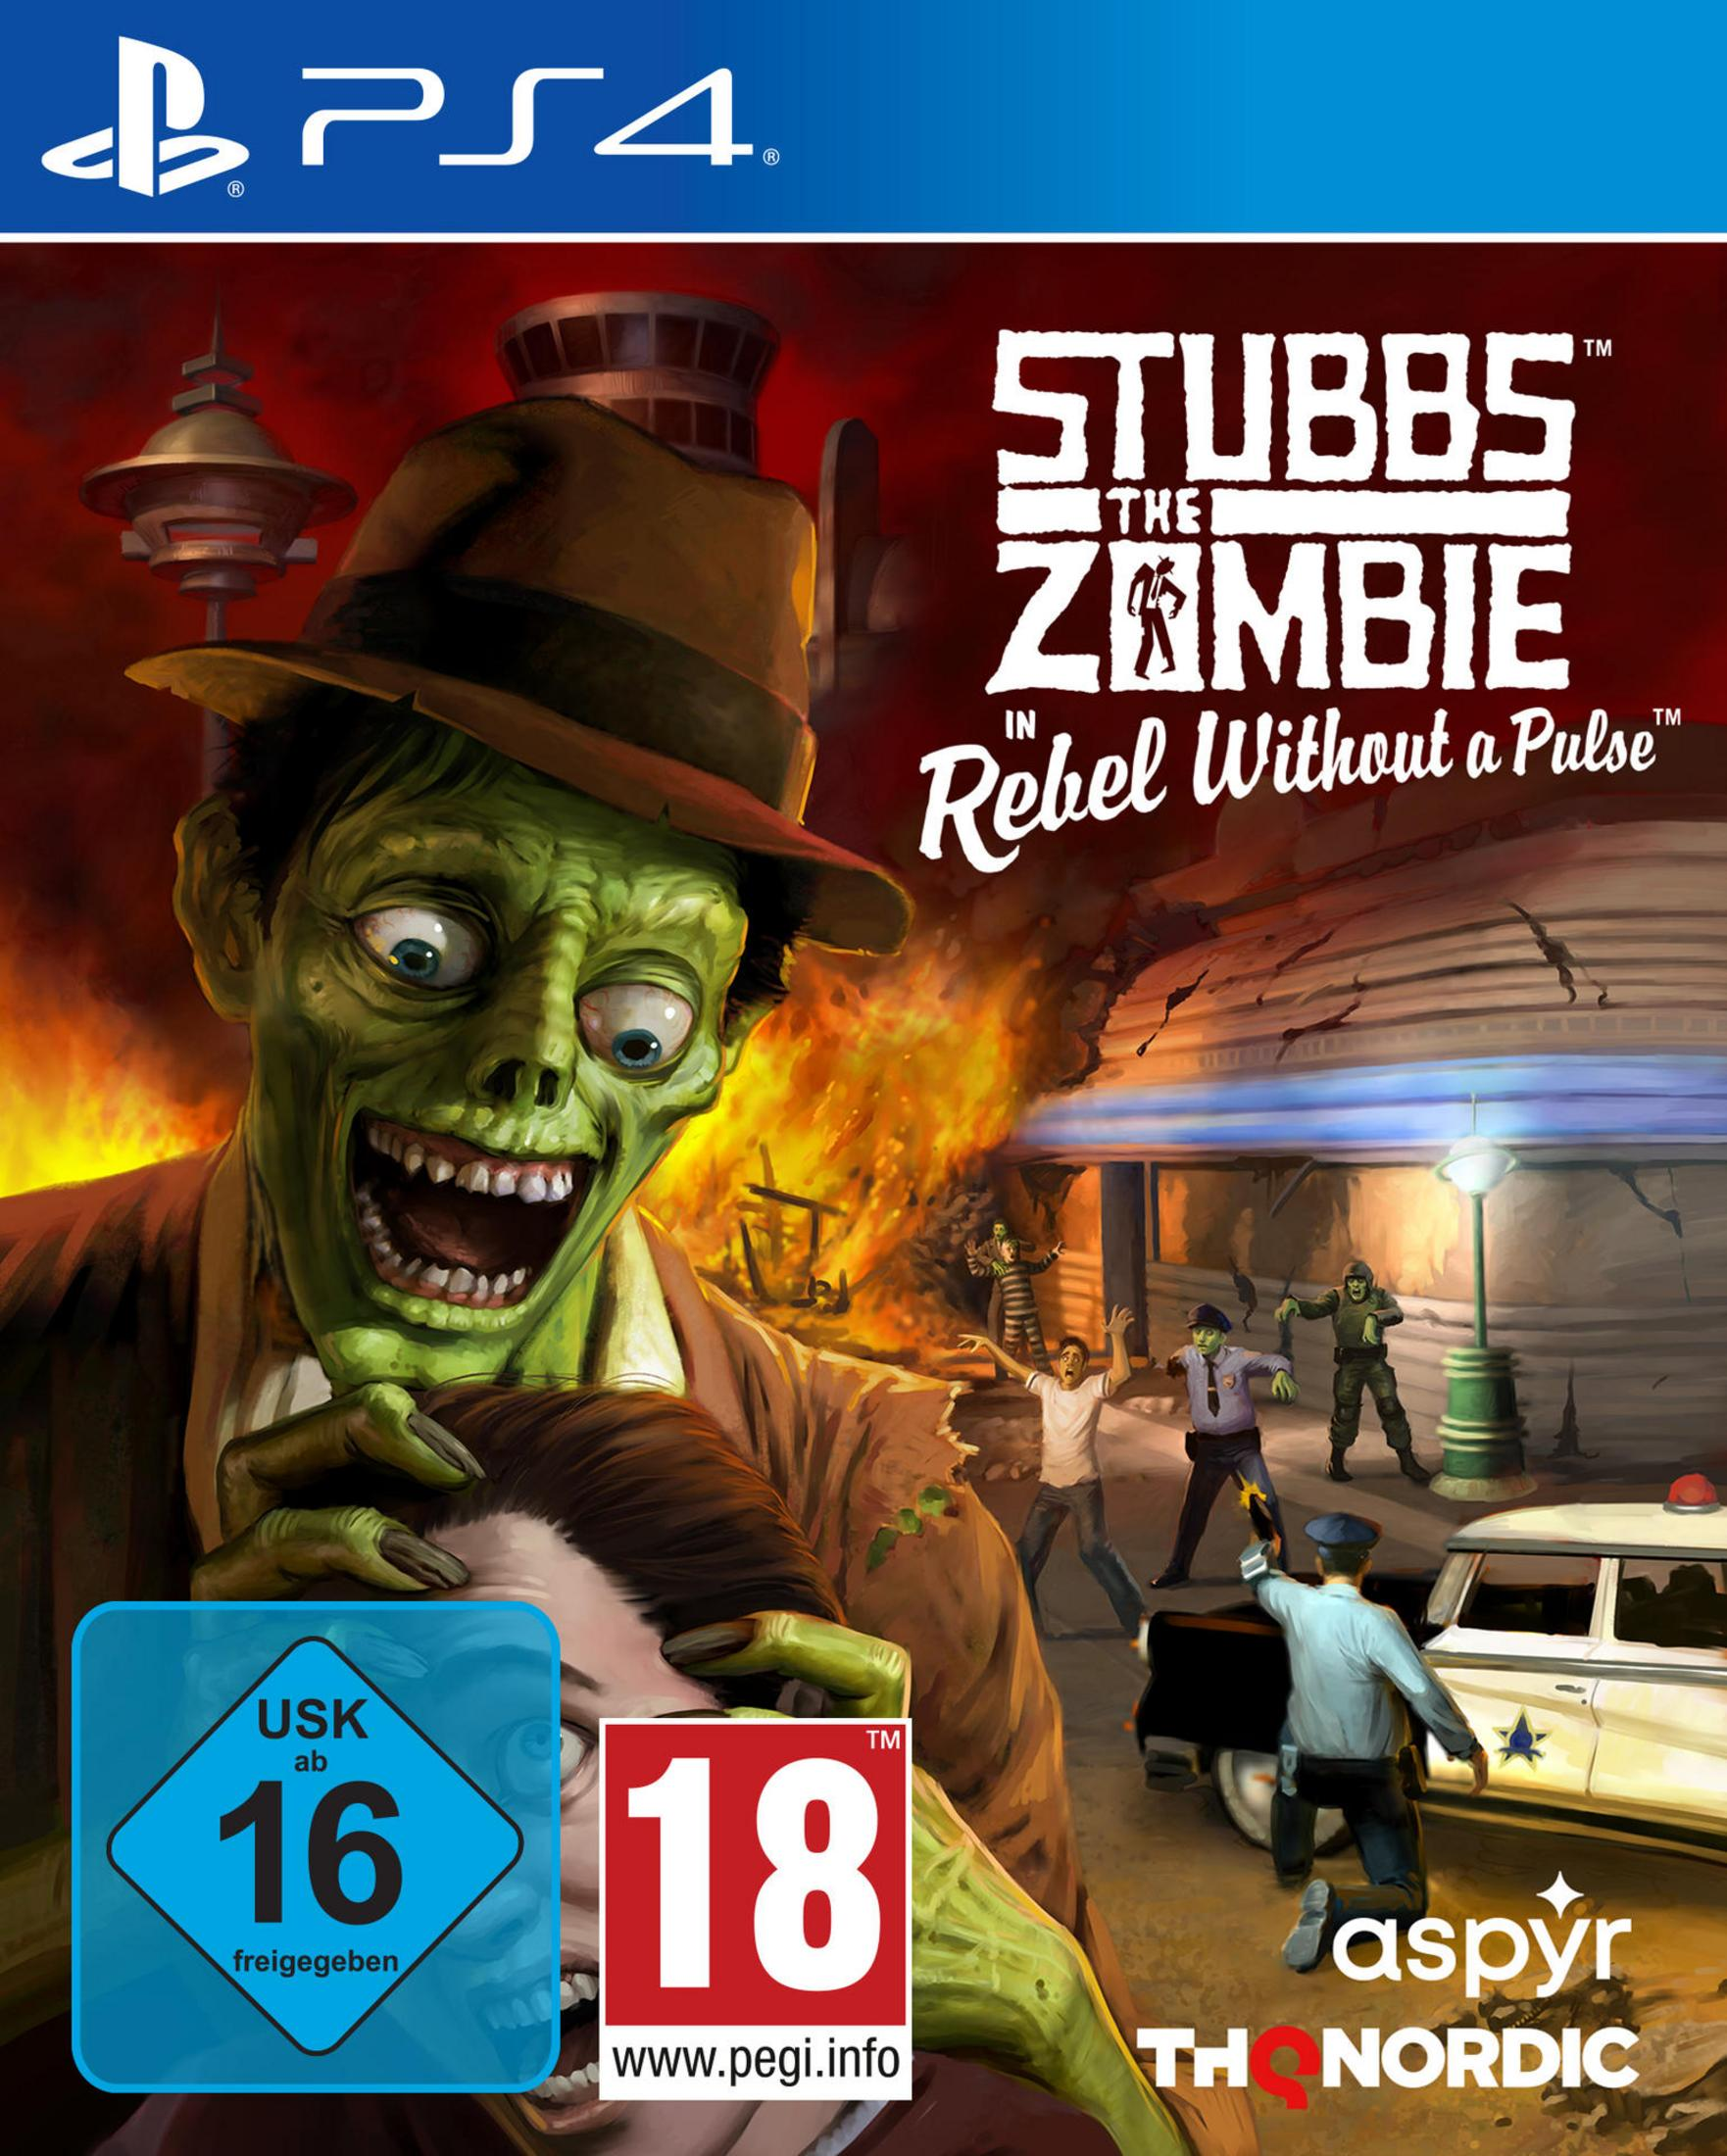 [PlayStation Stubbs PS-4 - the Rebel Zombie 4] Pulse in a Without